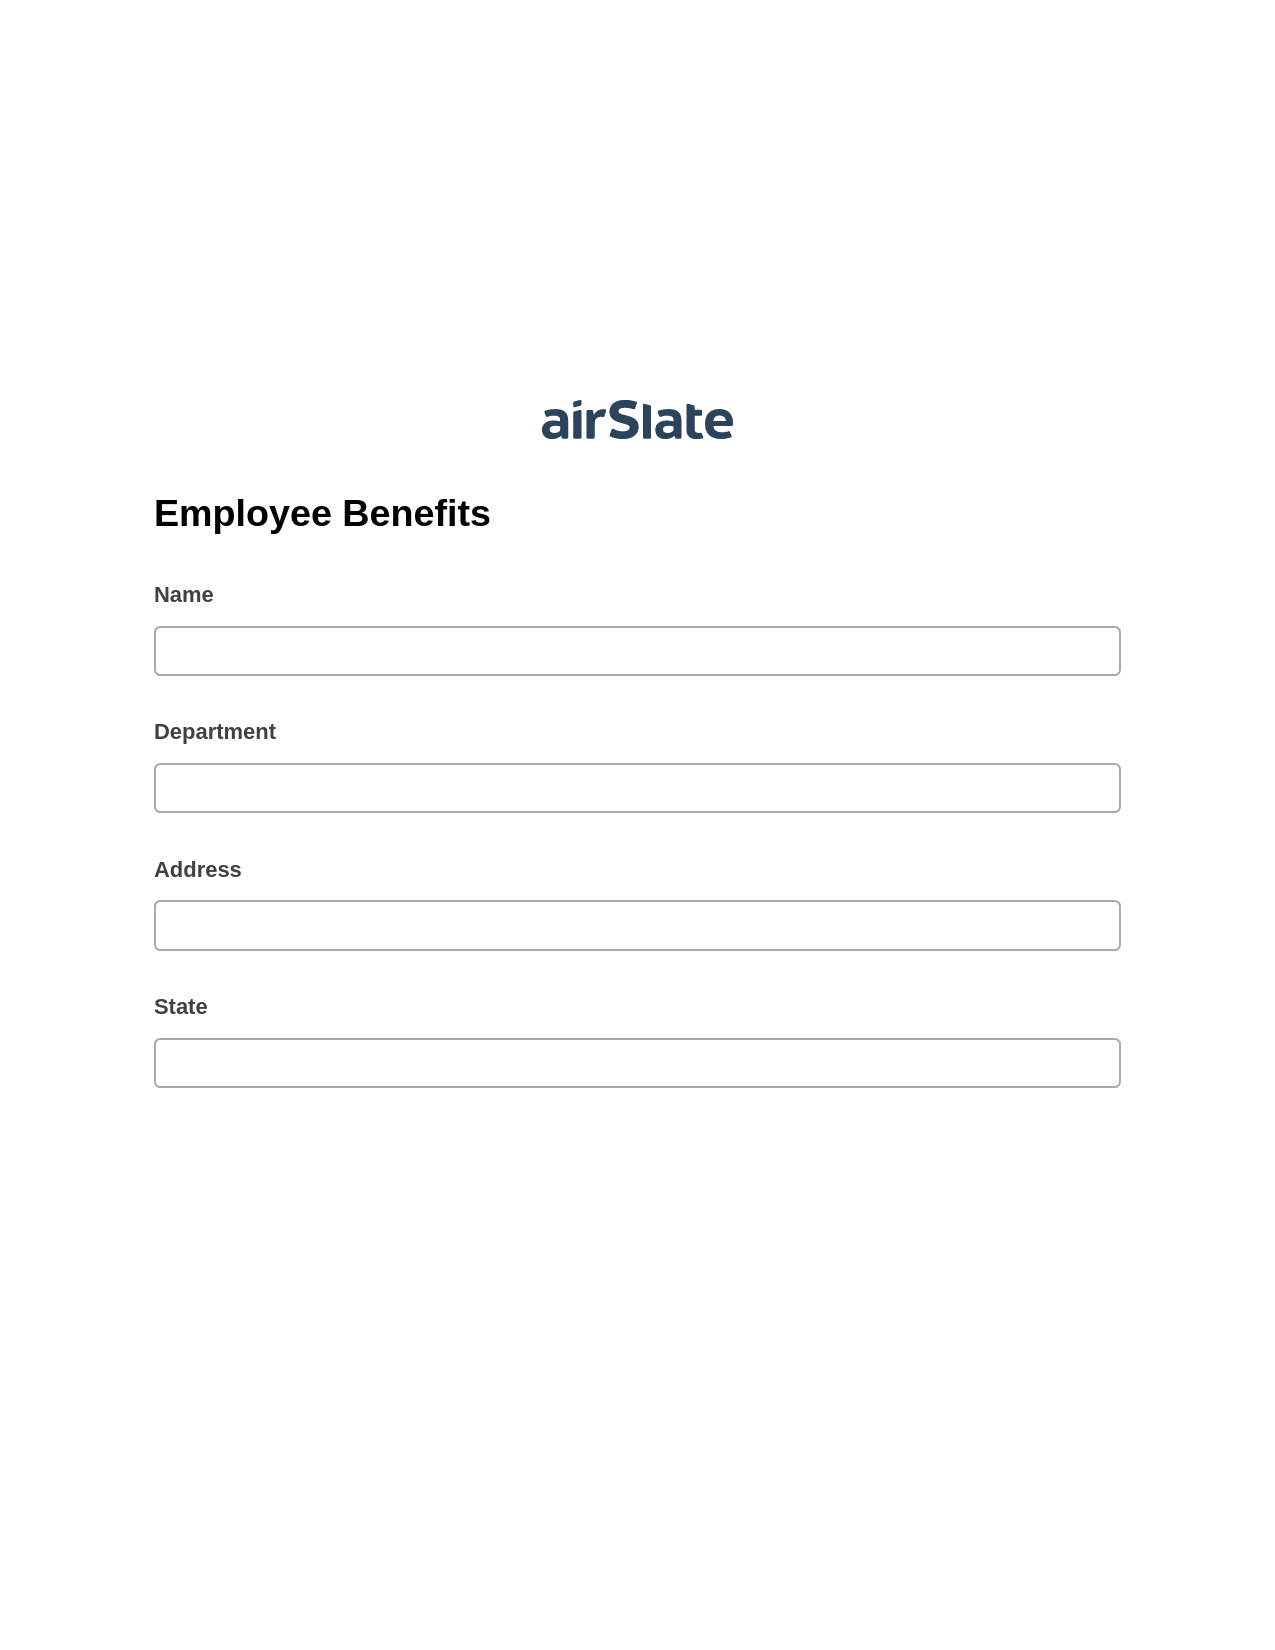 Multirole Employee Benefits Pre-fill Slate from MS Dynamics 365 Records Bot, Create QuickBooks invoice Bot, Archive to SharePoint Folder Bot